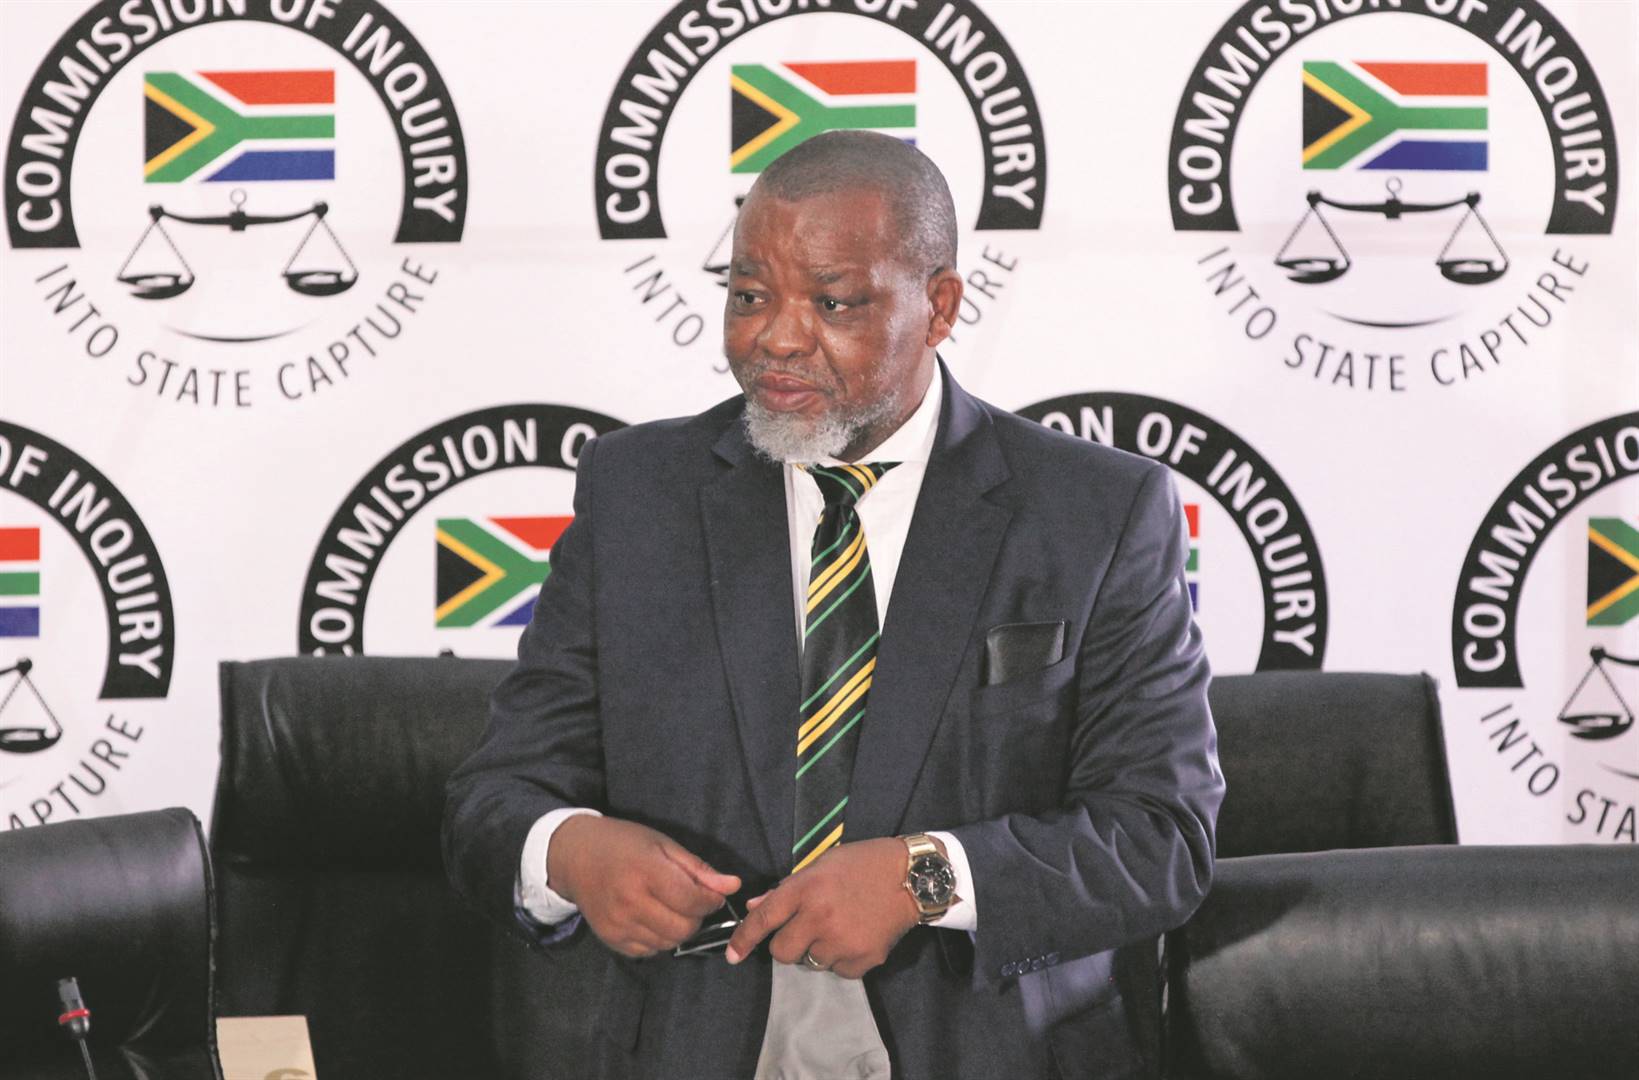 The State Capture report said Gwede Mantashe supported former Transnet CEO Siyabonga Gama despite him facing serious allegations.     Photo: Gallo Images/Luba Lesolle